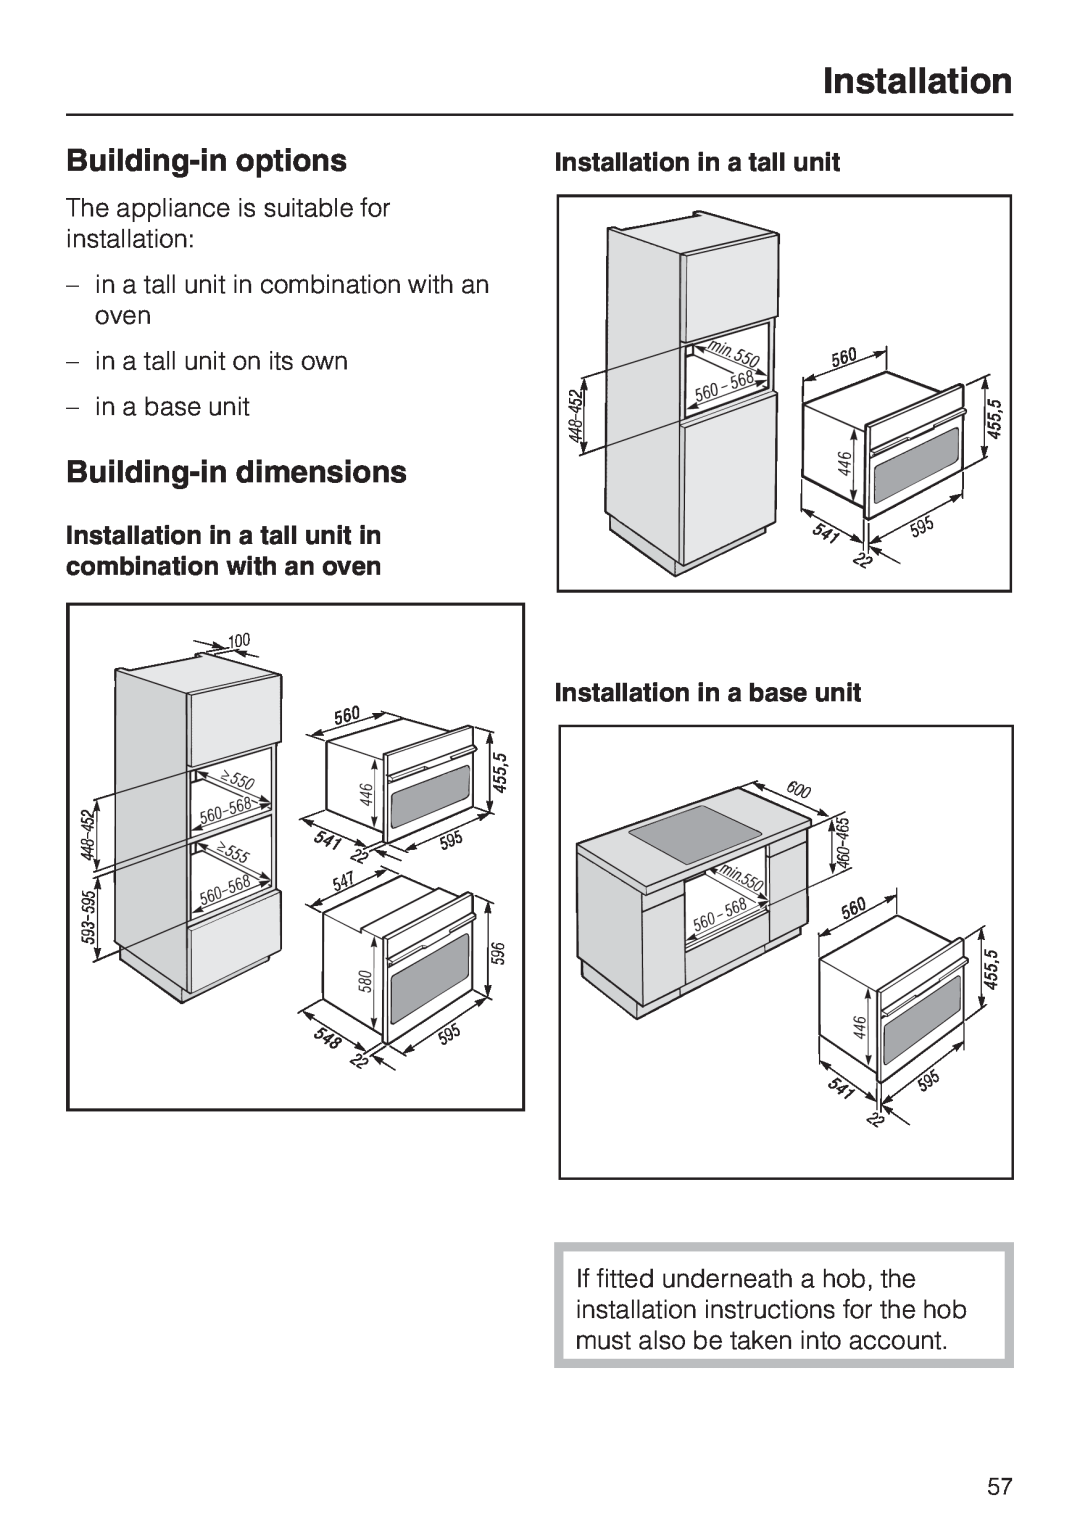 Miele H 4020 BM, H 4010 BM manual Installation, Building-in options, Building-in dimensions 